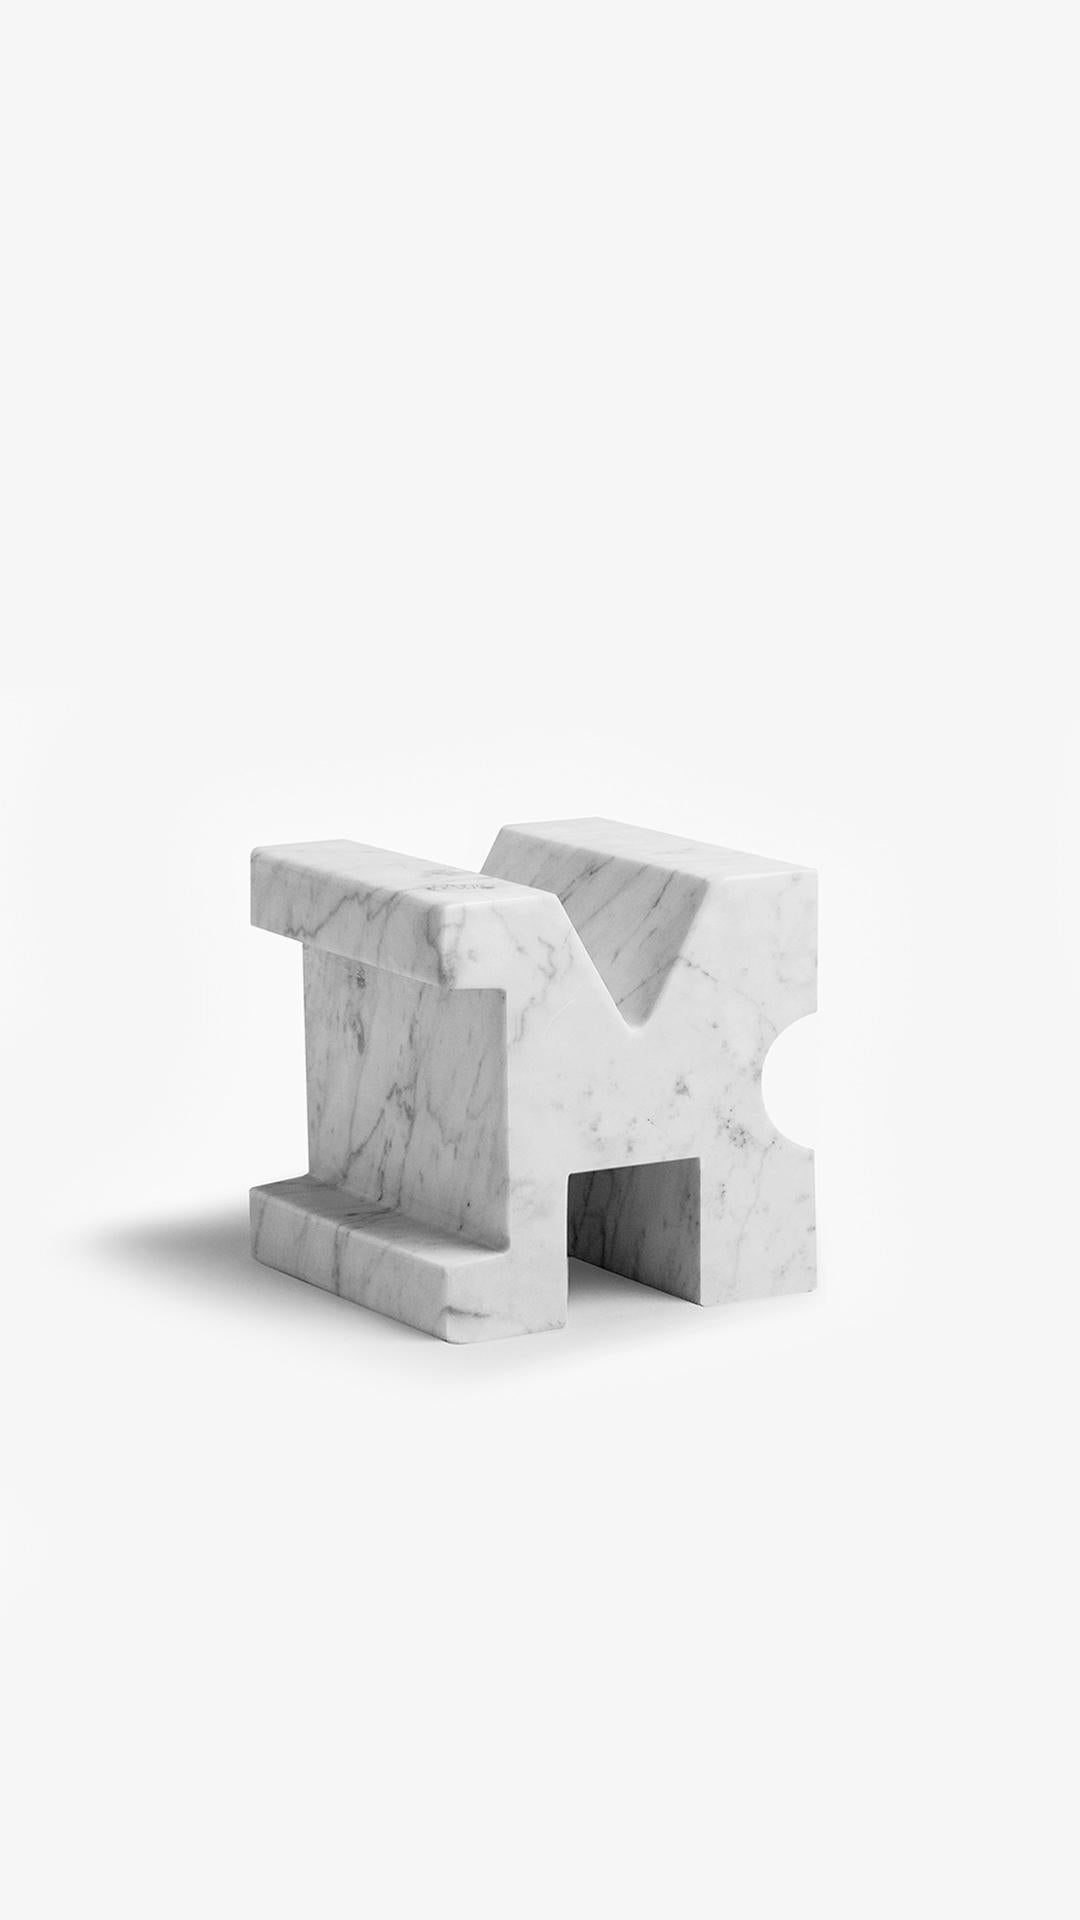 Type Spaghetti meter by Studio Lievito
Dimensions: D10 x W10 x H10 cm
Materials: Bianco Carrara marble.
Weight: 1.8 kg

Turning ordinary into extraordinary. By a simple turn, one block of Carrara marble becomes a measuring device for spaghetti